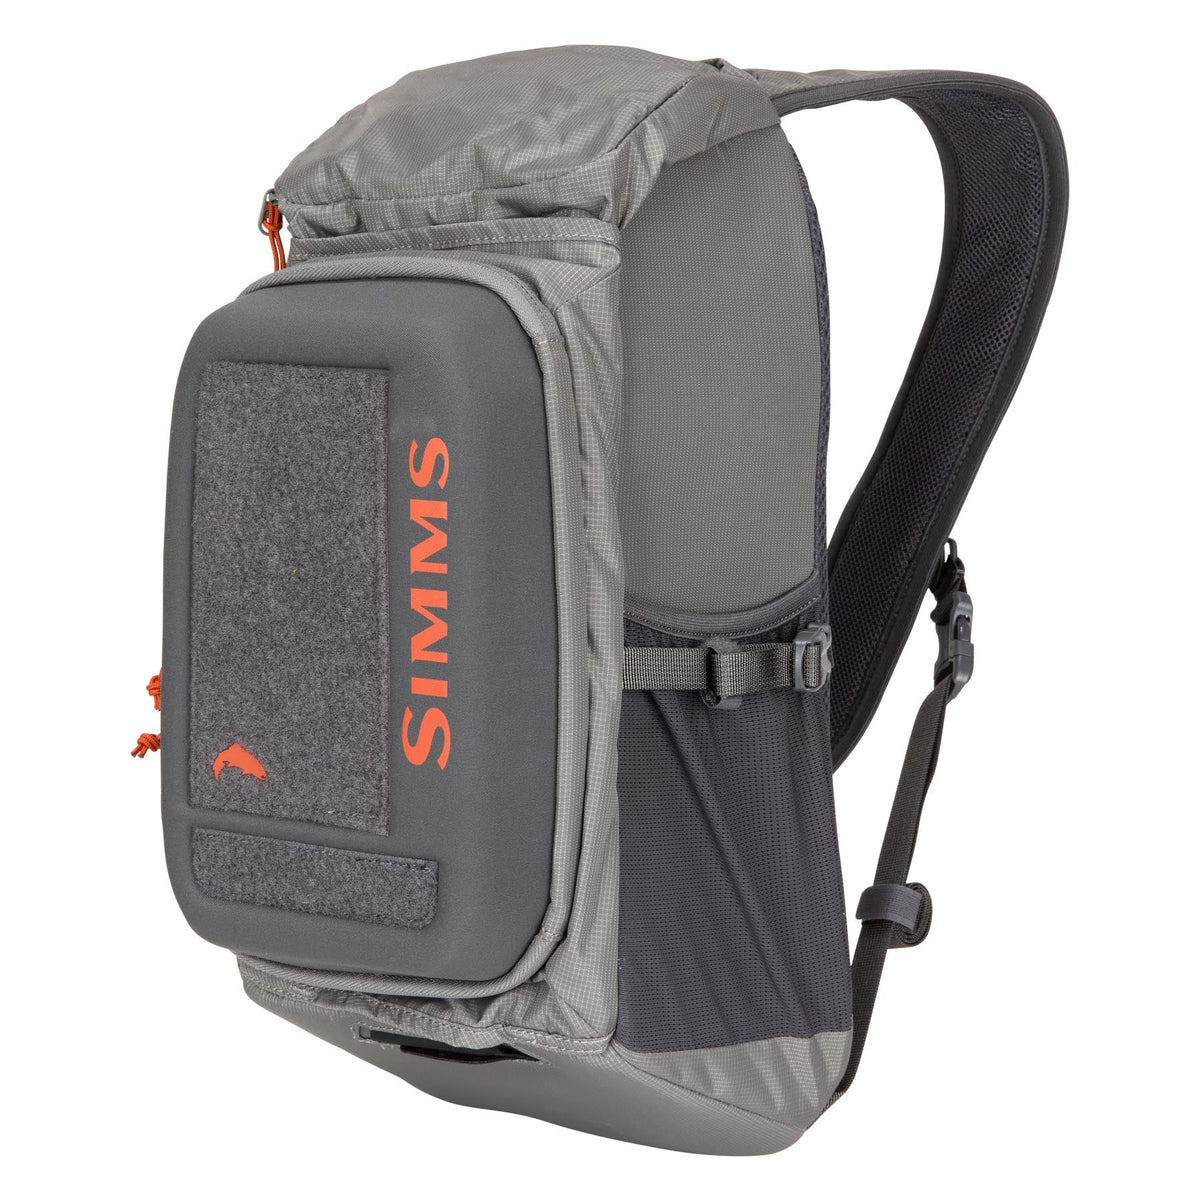 Patagonia Guidewater 15L Sling Pack - Fly Fishing